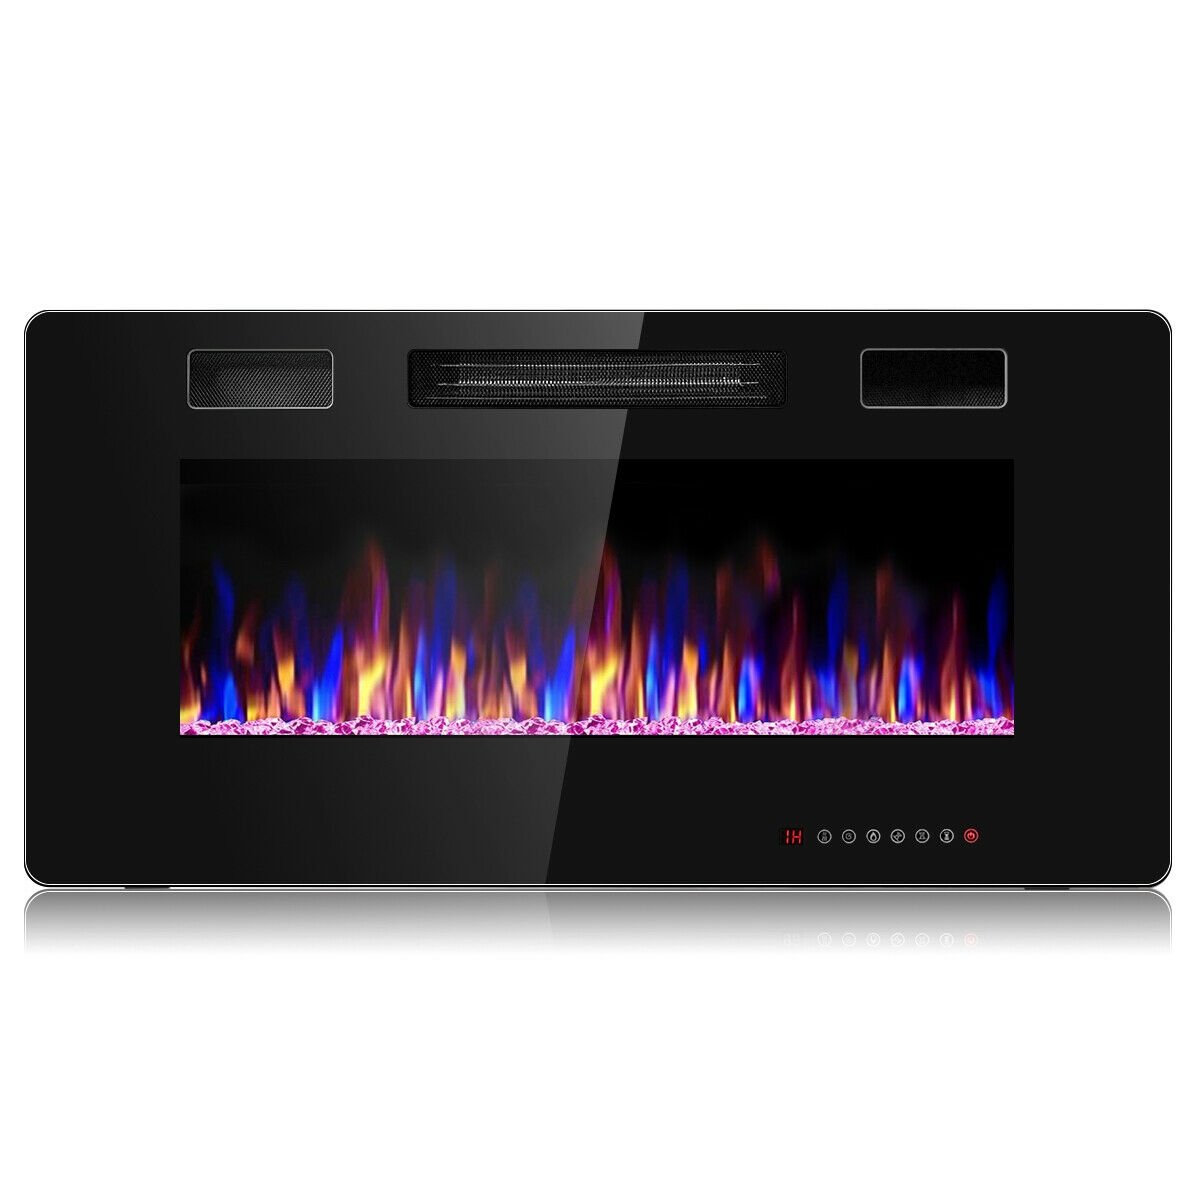 36" Recessed Wall Mounted Electric Fireplace with 12 Flame Colors-CASAINC